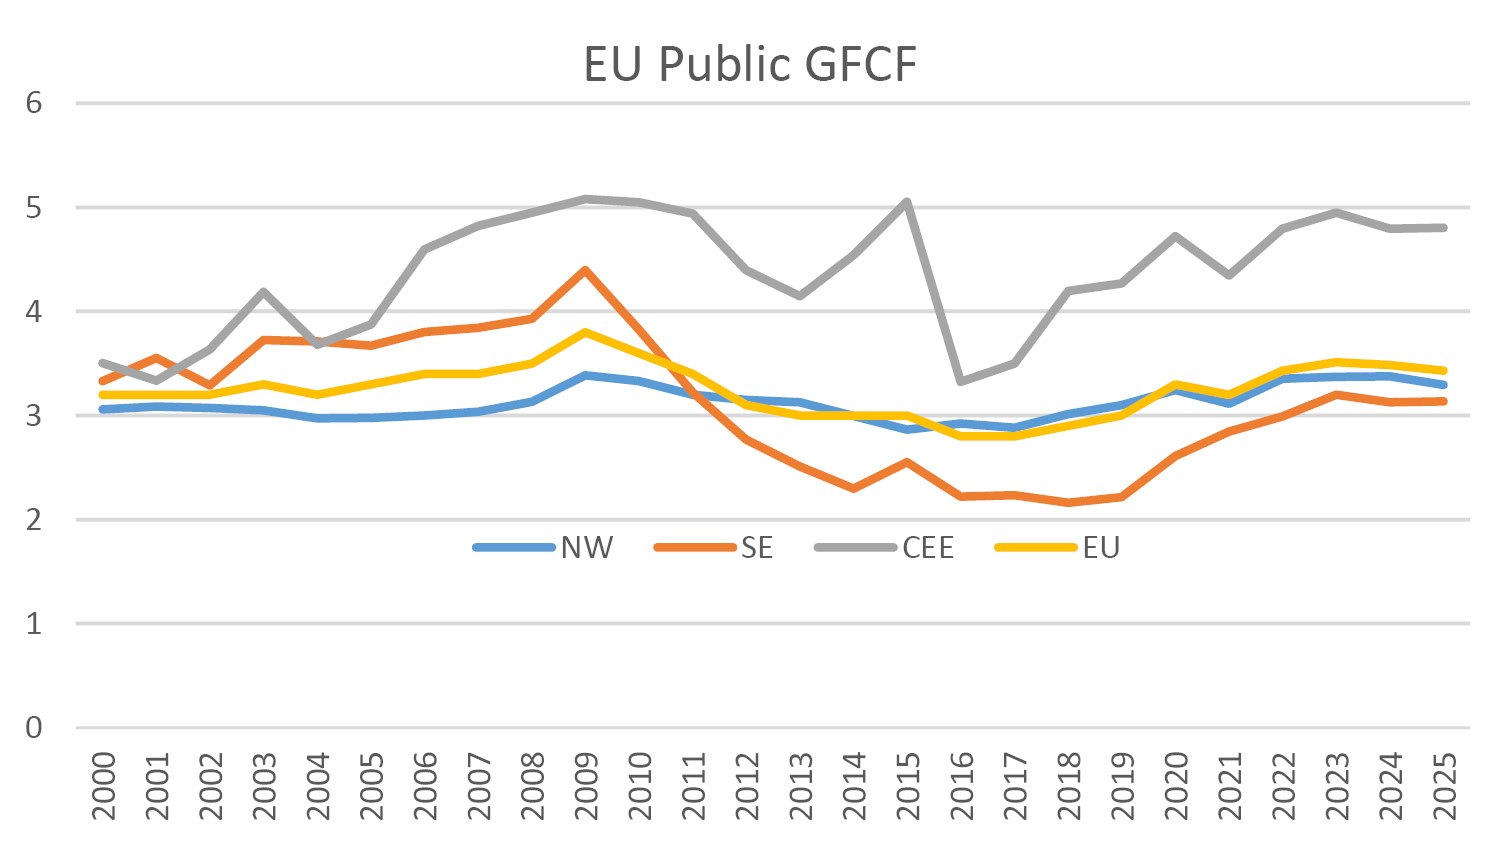 Line graph showing the trend of government investment spending as a percentage of GDP from 2000 to 2025. For Northern and Western European countries this will remain stable around the average of 3.5 percent, for Central and Eastern European countries it will fall below the historical peak of 5 percent, and for Southern European countries it will reach the average of 3.5 percent.